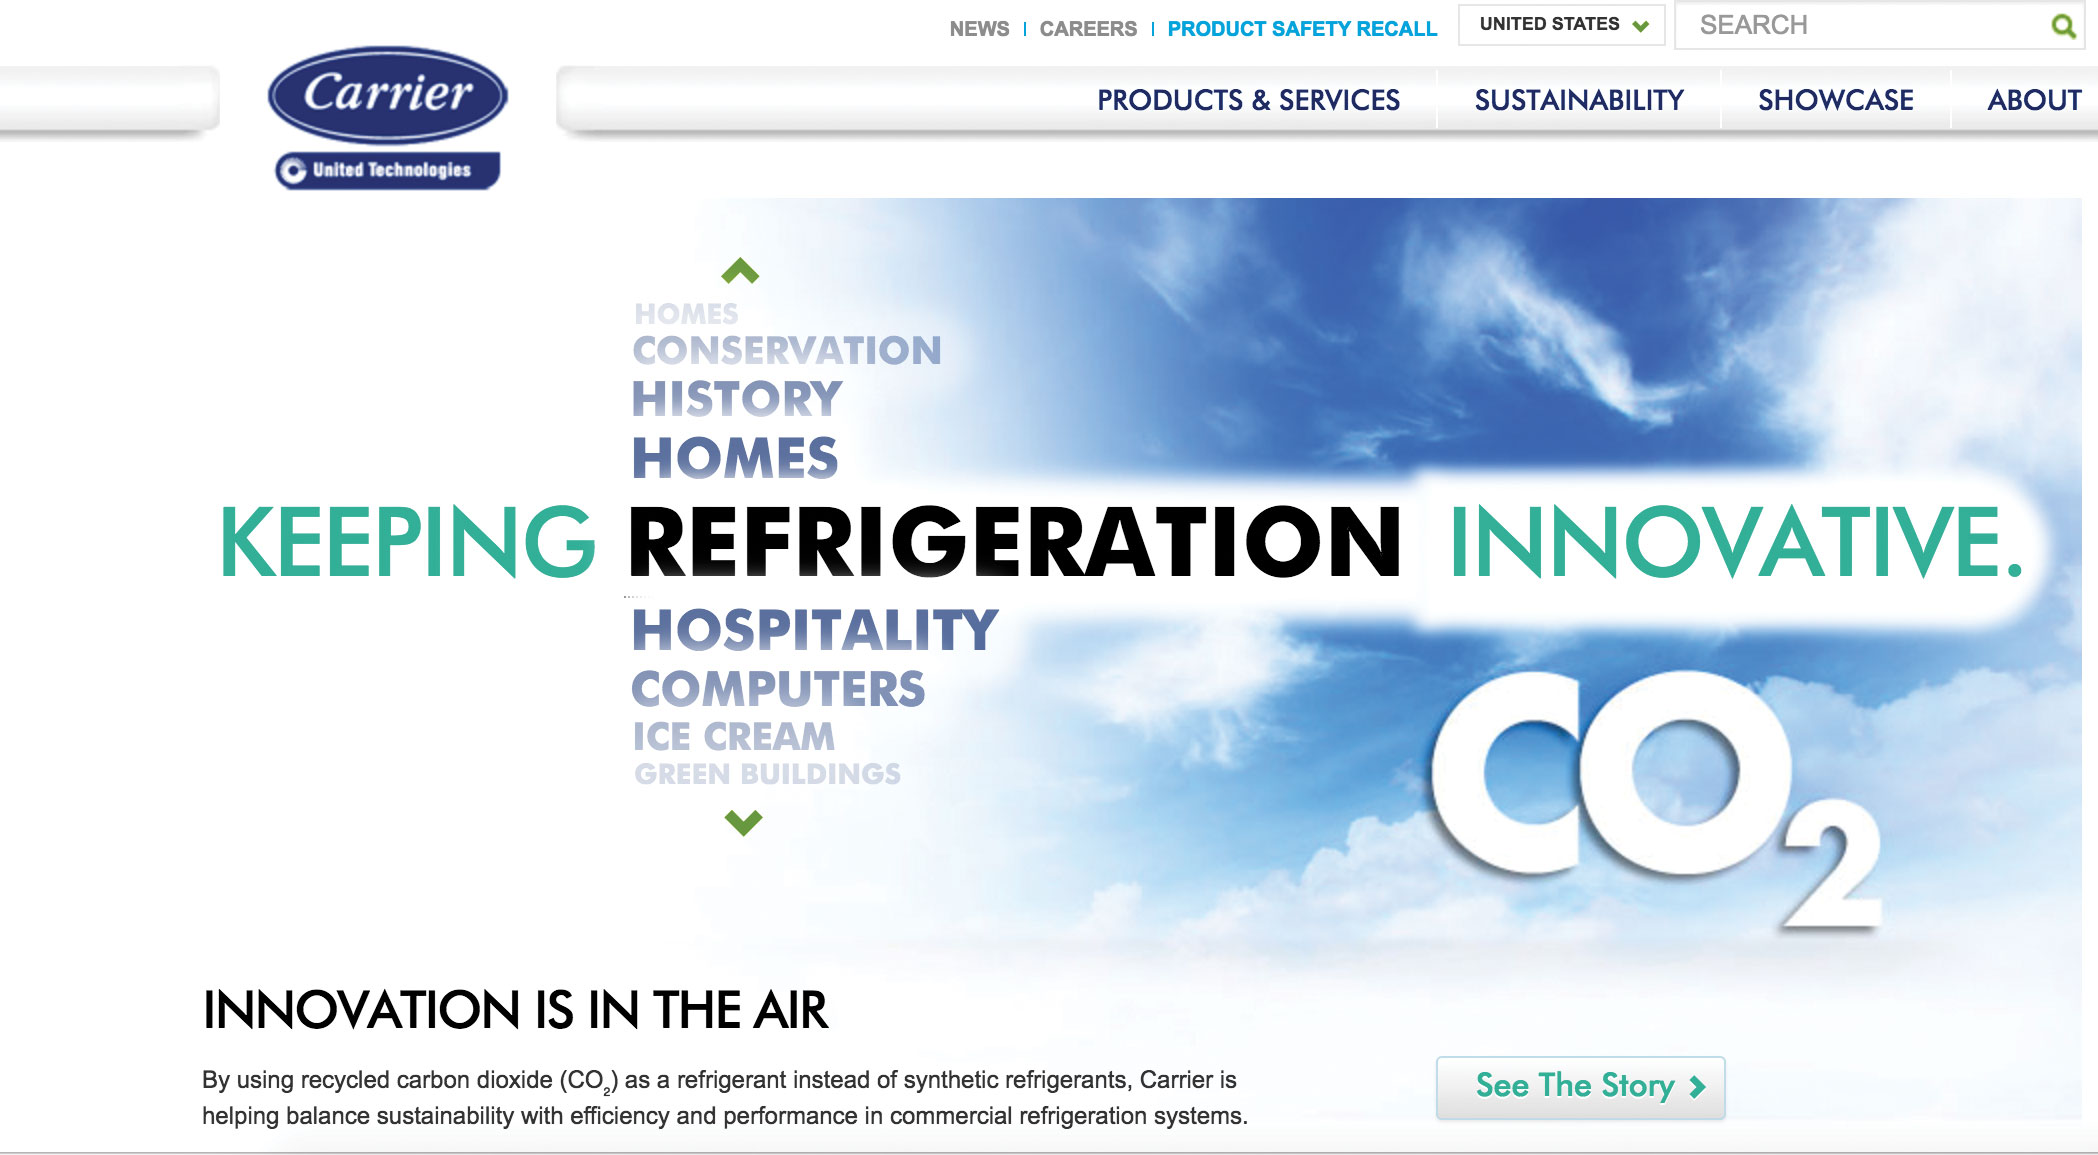 Clean Recycled CO2 Refrigeration sold in Europe